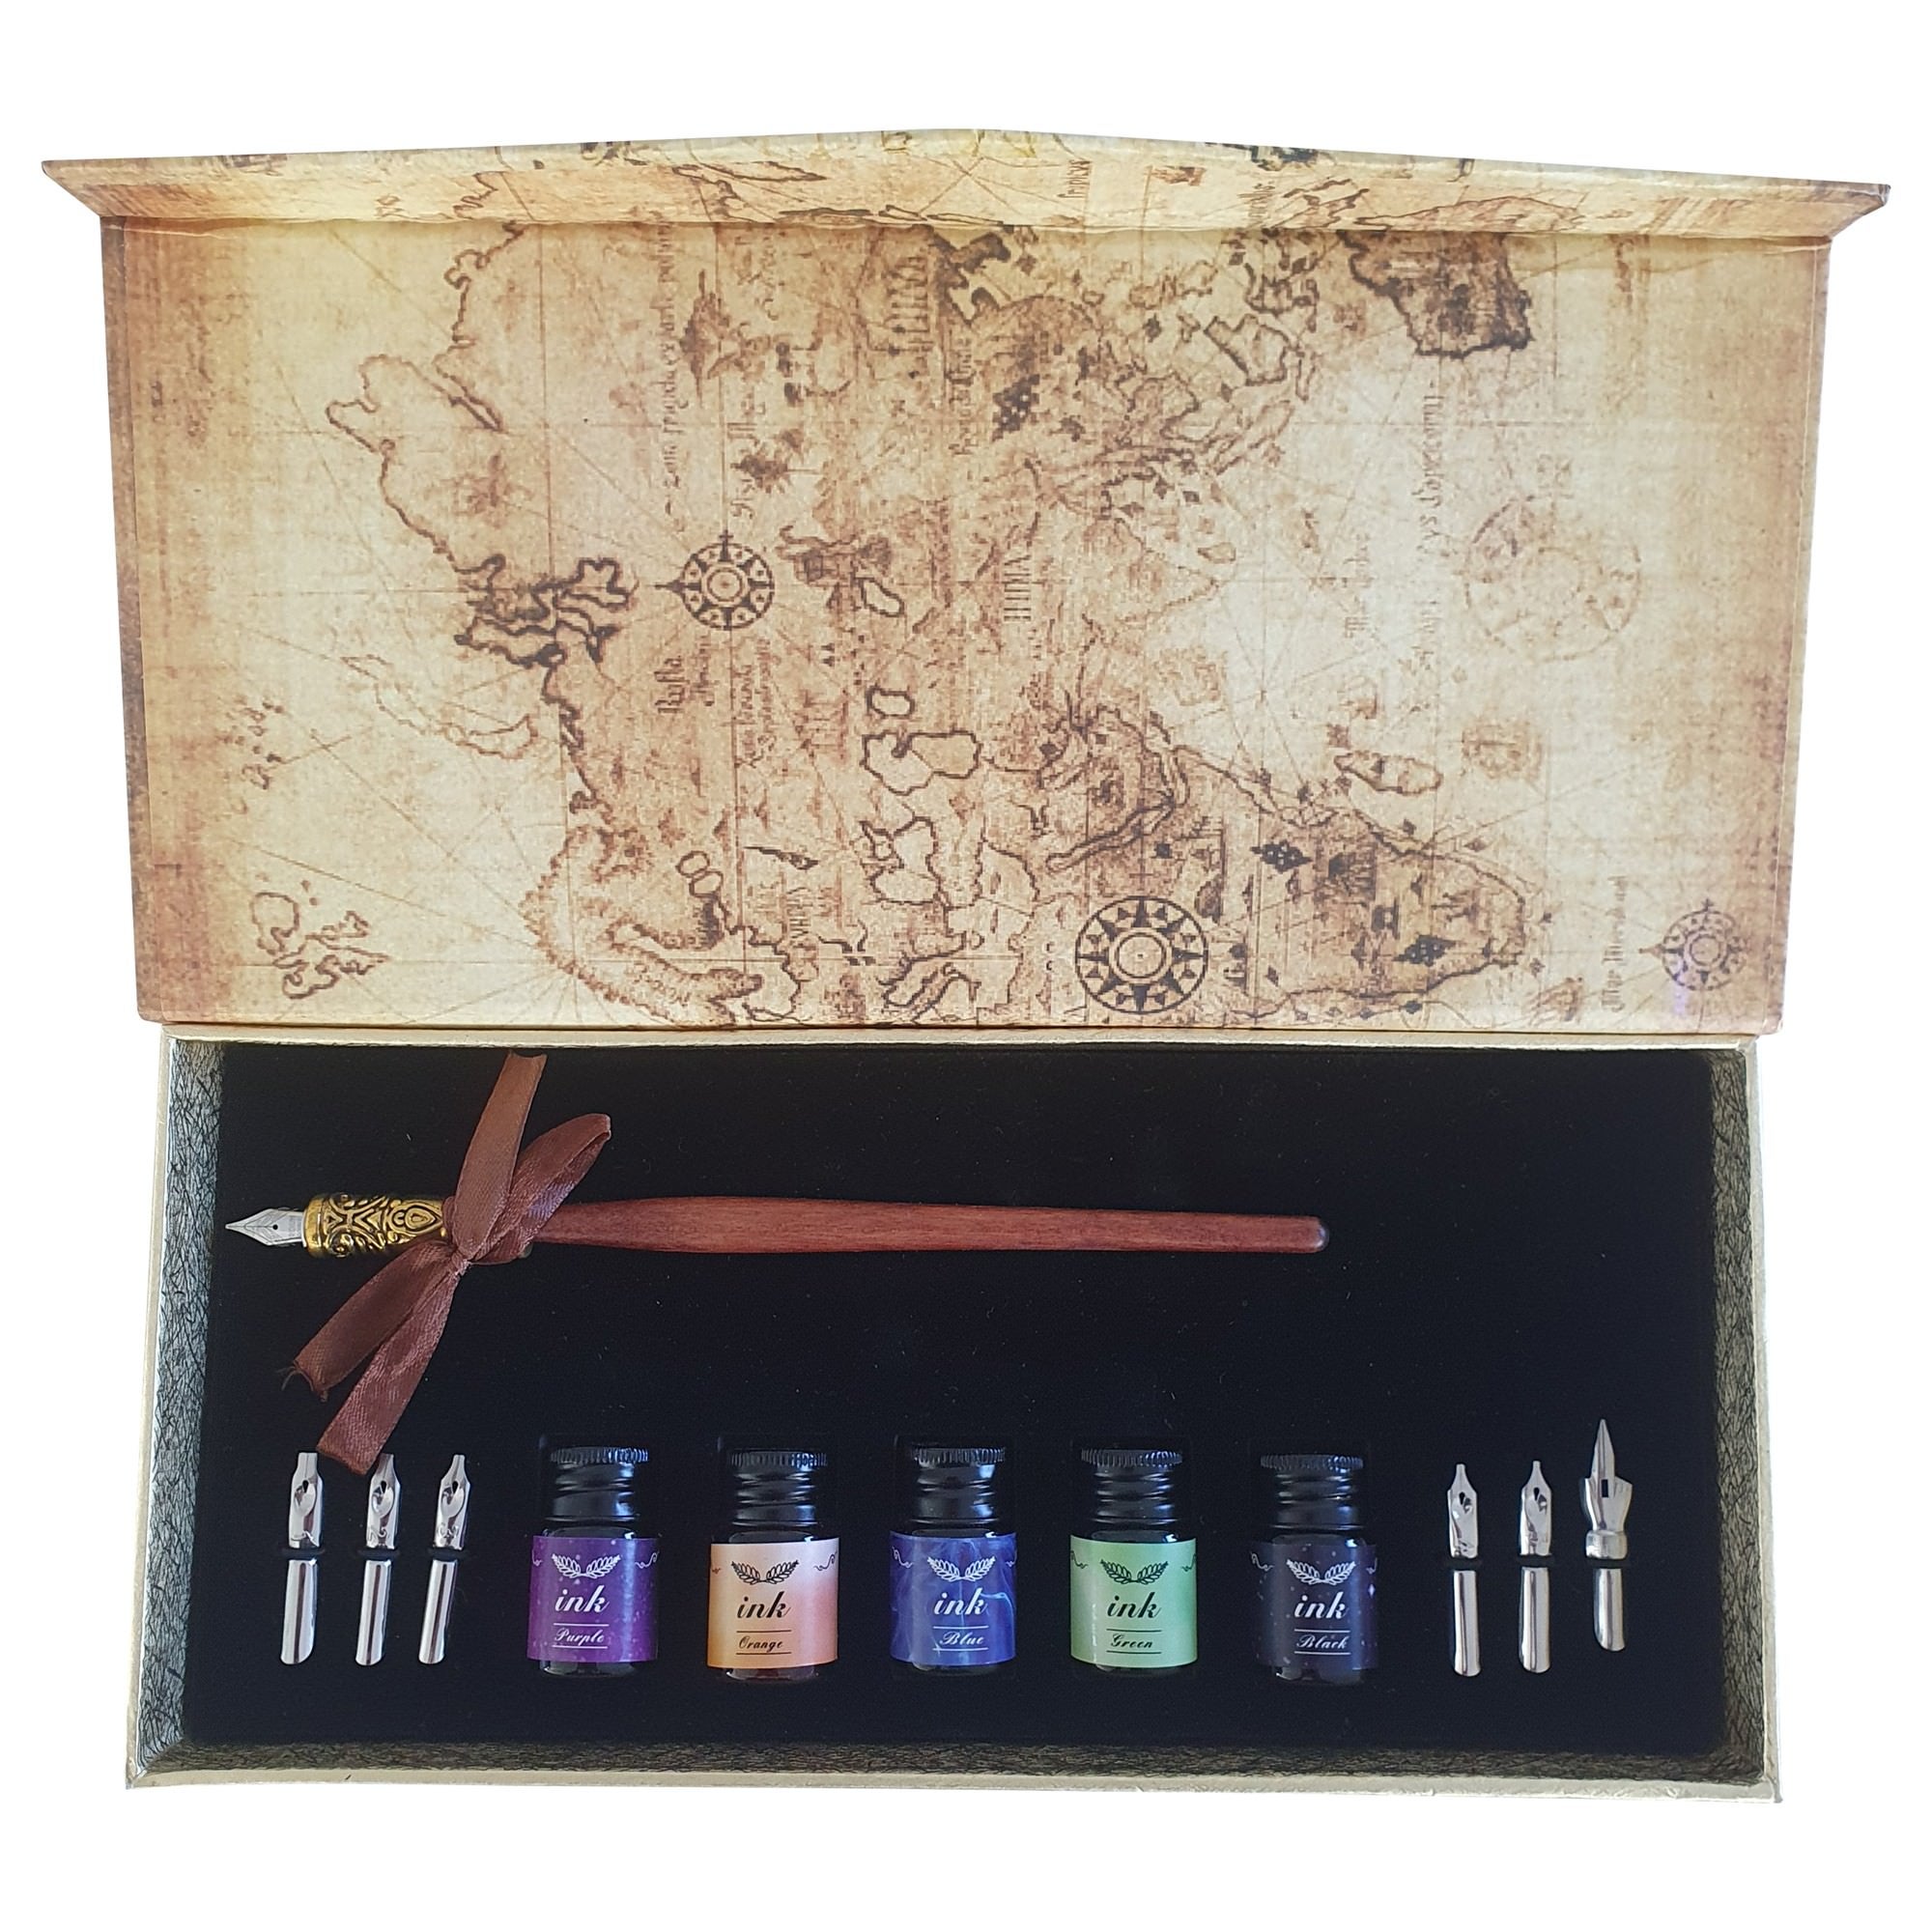 Balmoral Letters 5 Colour Ink Calligraphy Writing Set